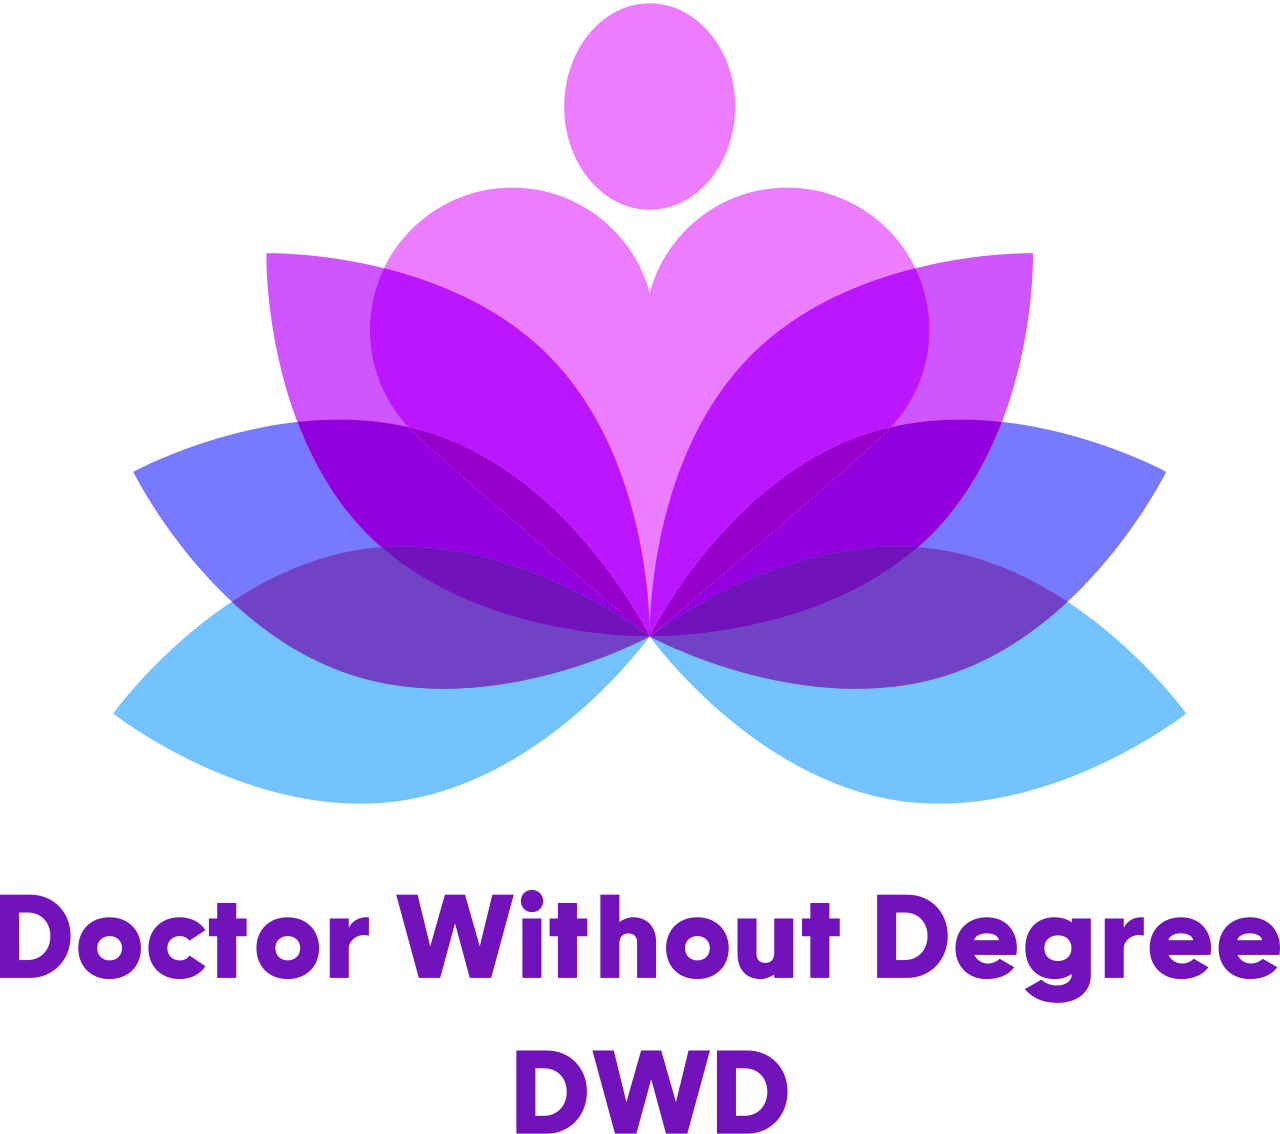 Doctor Without Degree 
DWD's logo